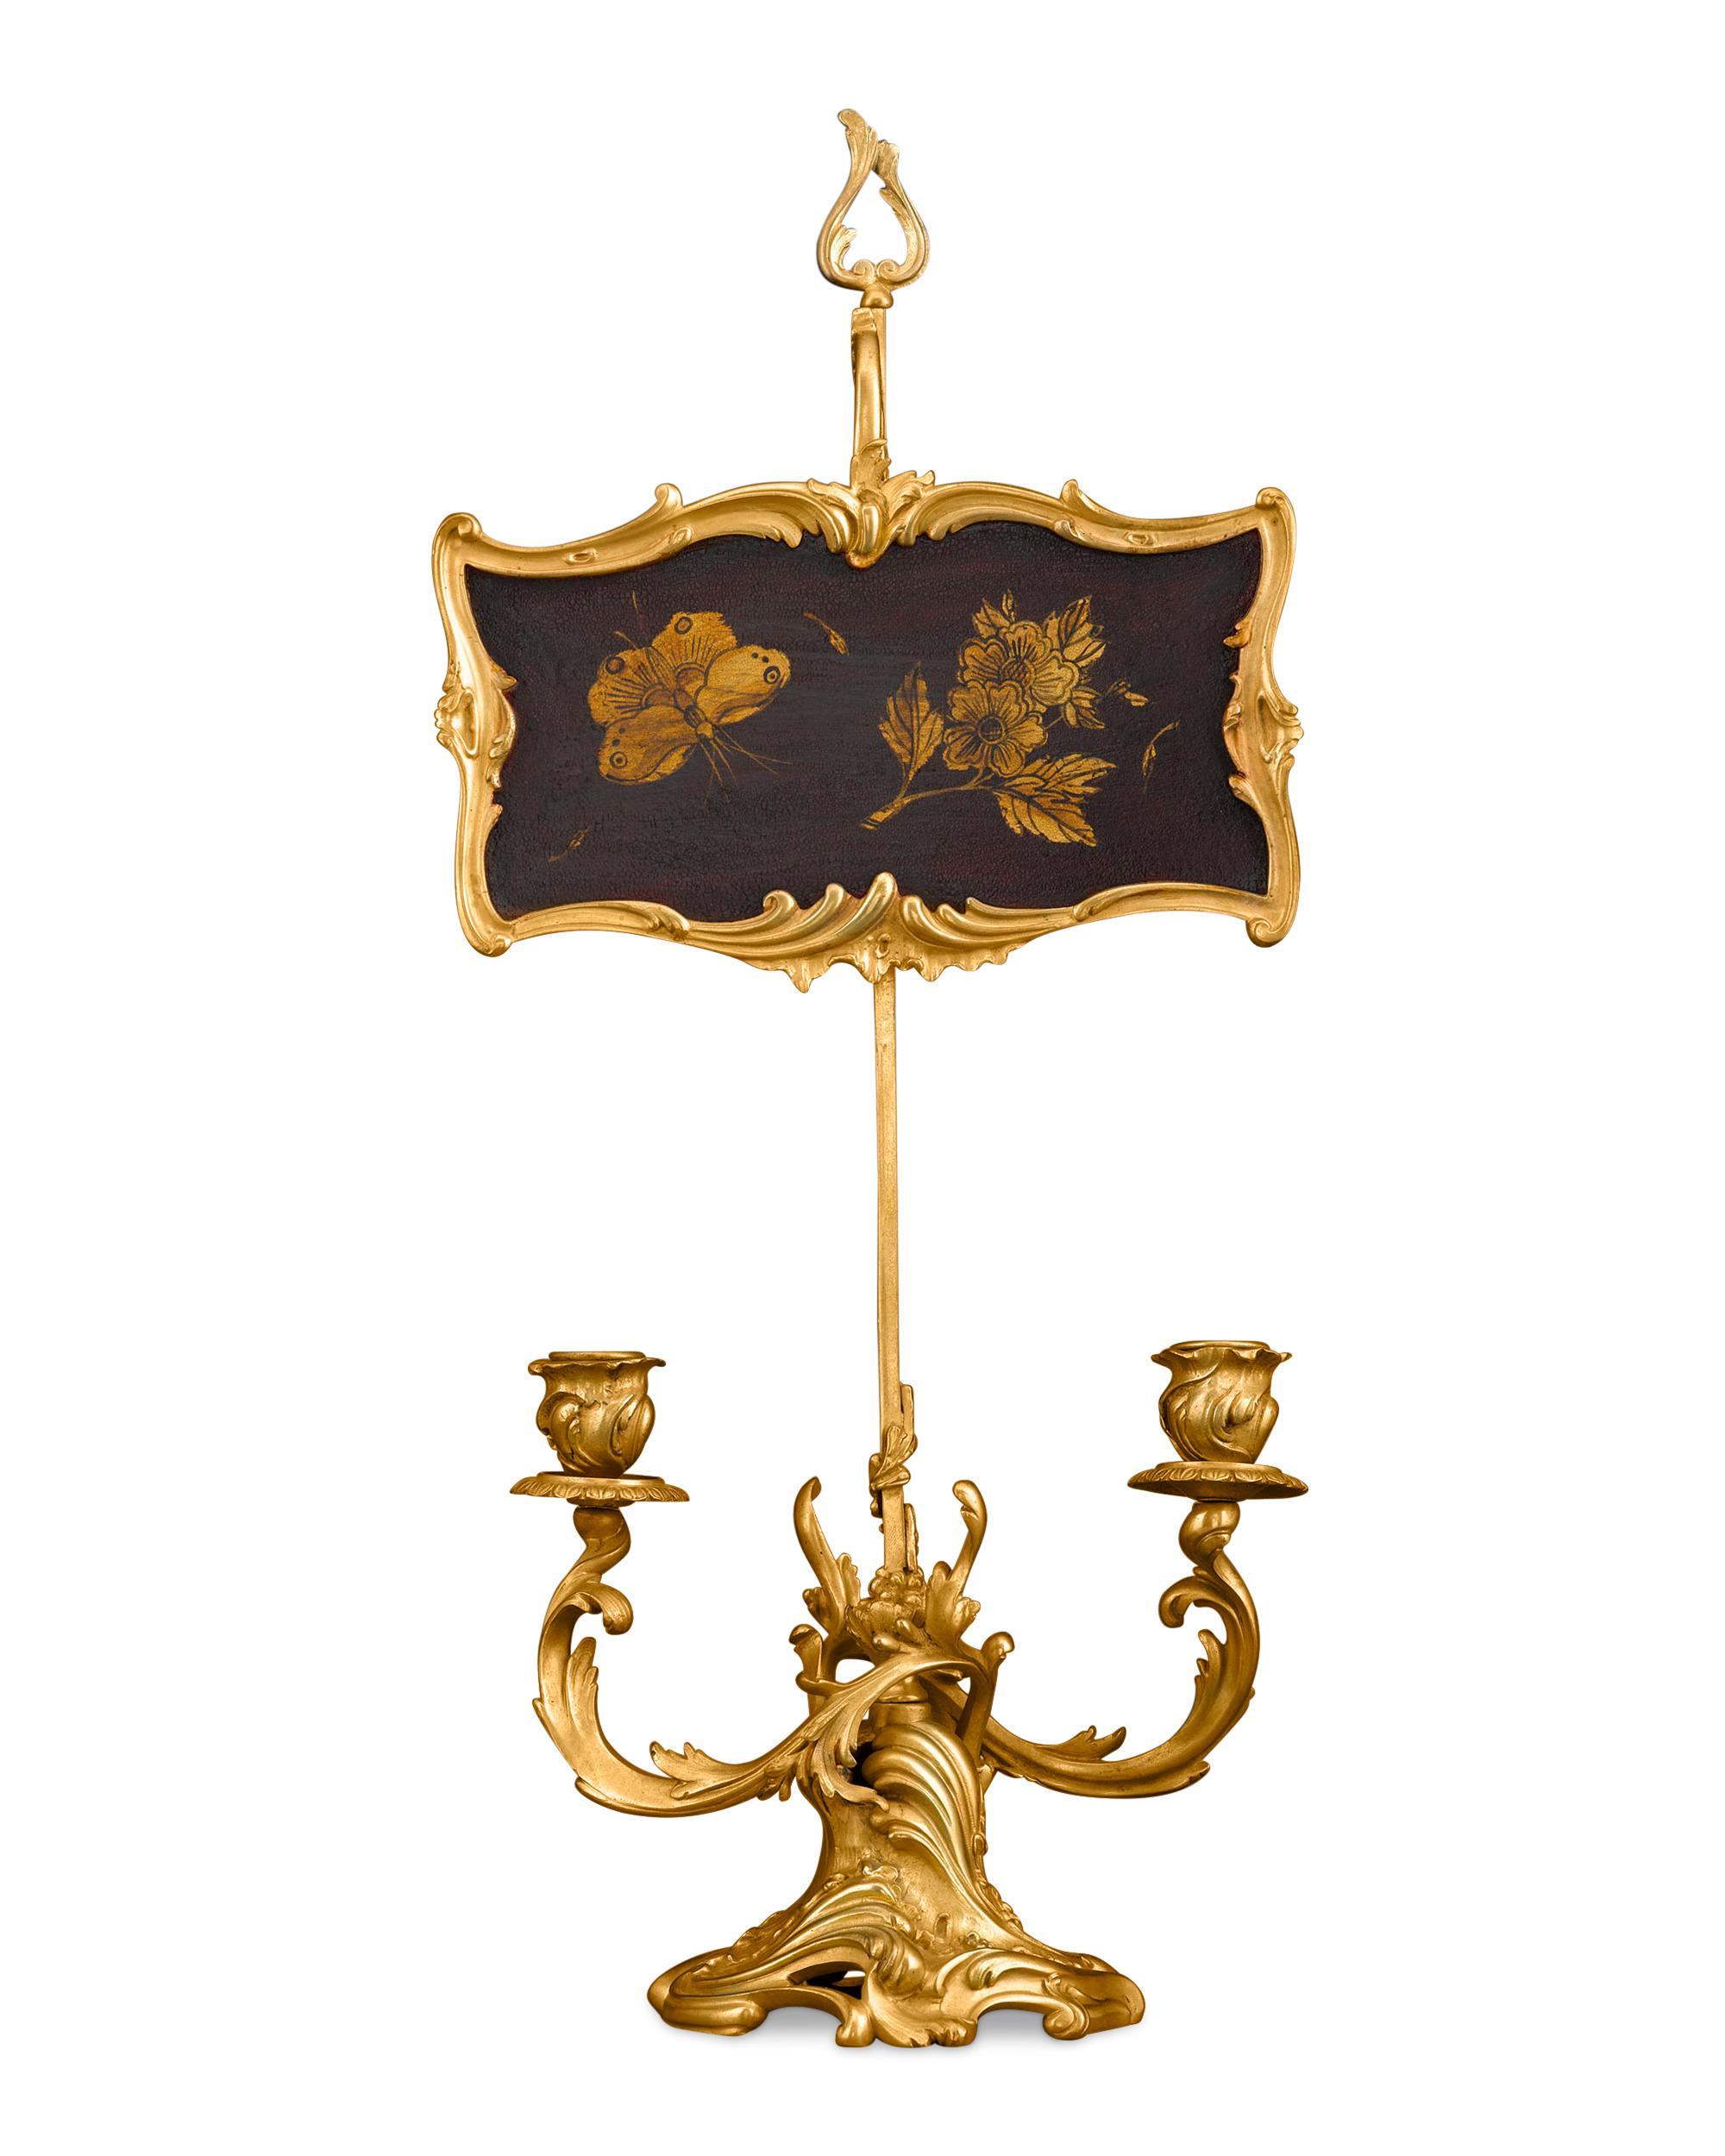 This rare and enchanting two-light candelabrum is a shining example of 19th century interior lighting. Crafted of bronze ormolu in a luxurious Rococo design, the candleholder also features a wooden screen, framed in ormolu and embellished with a